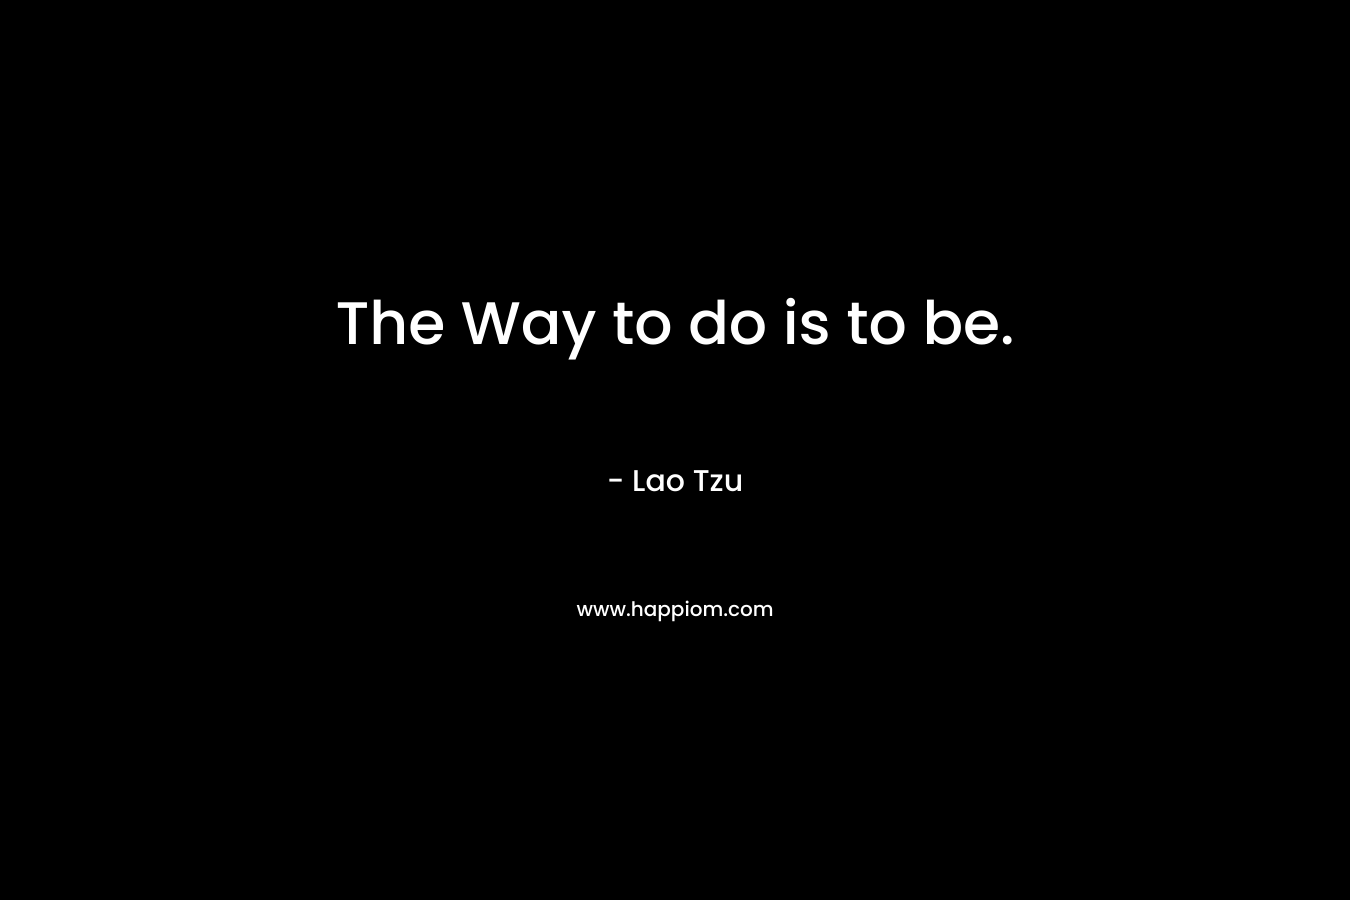 The Way to do is to be. – Lao Tzu